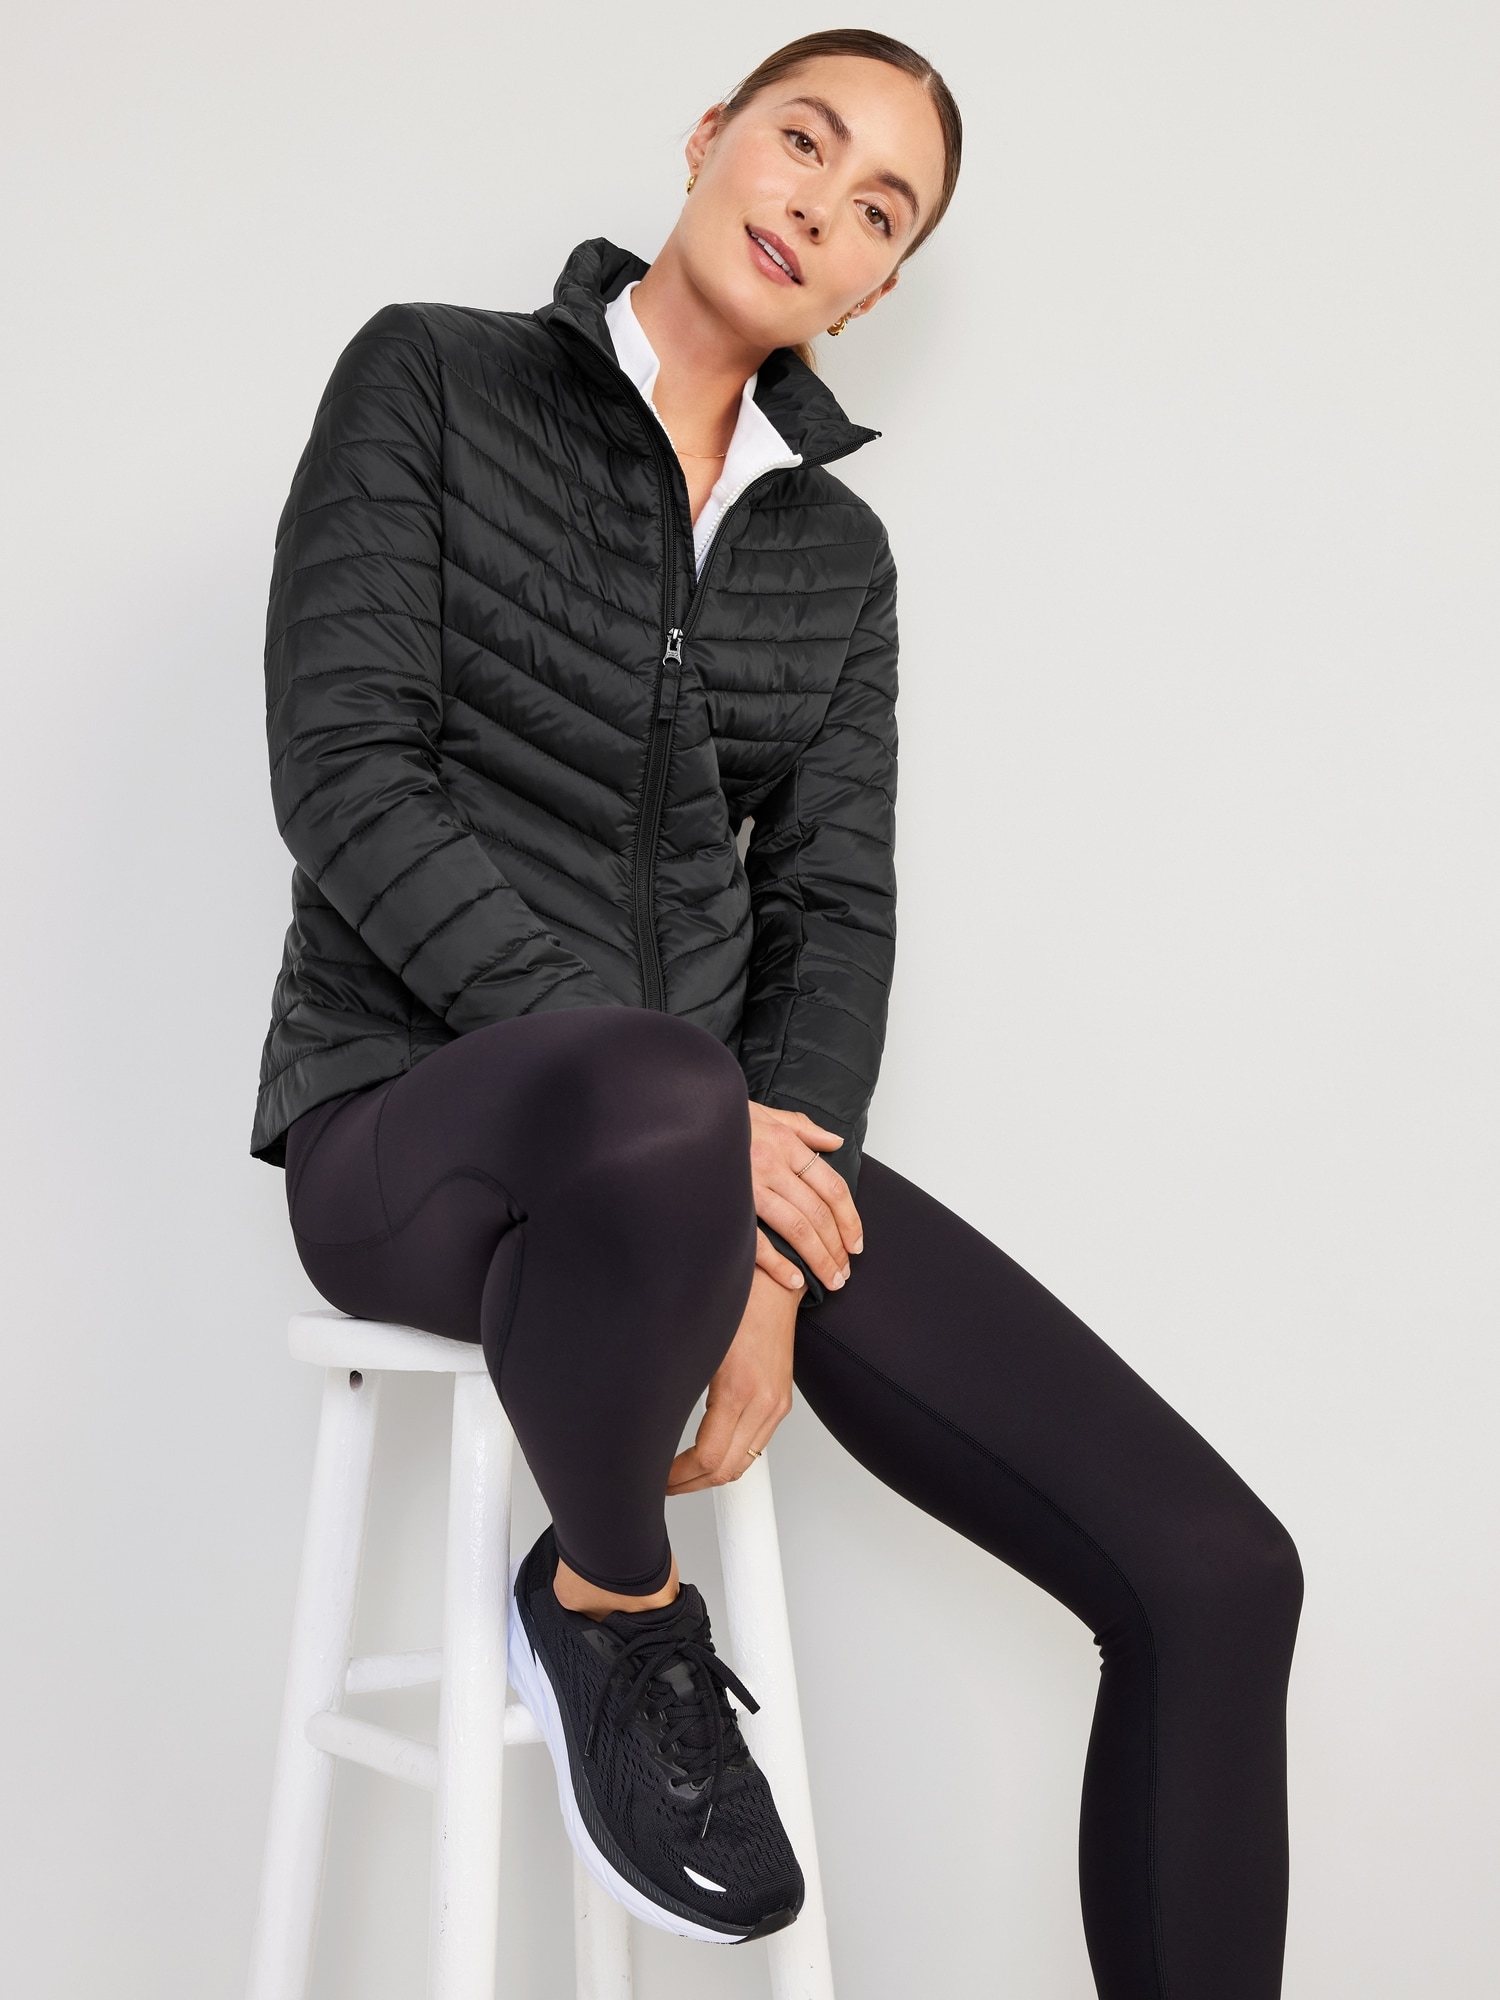 Narrow-Channel Quilted Puffer Jacket for Women | Old Navy